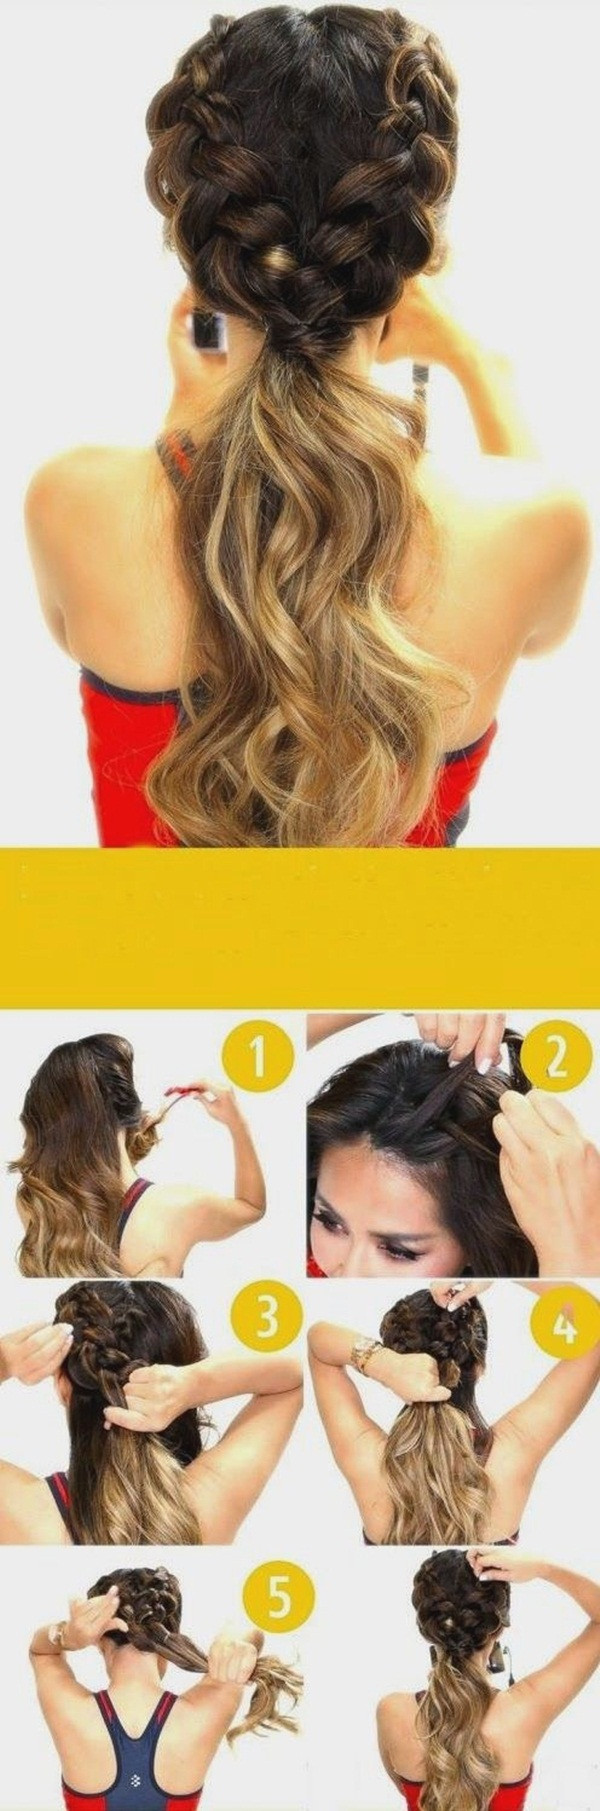 Cute School Hairstyles
 40 Easy Hairstyles for Schools to Try in 2016